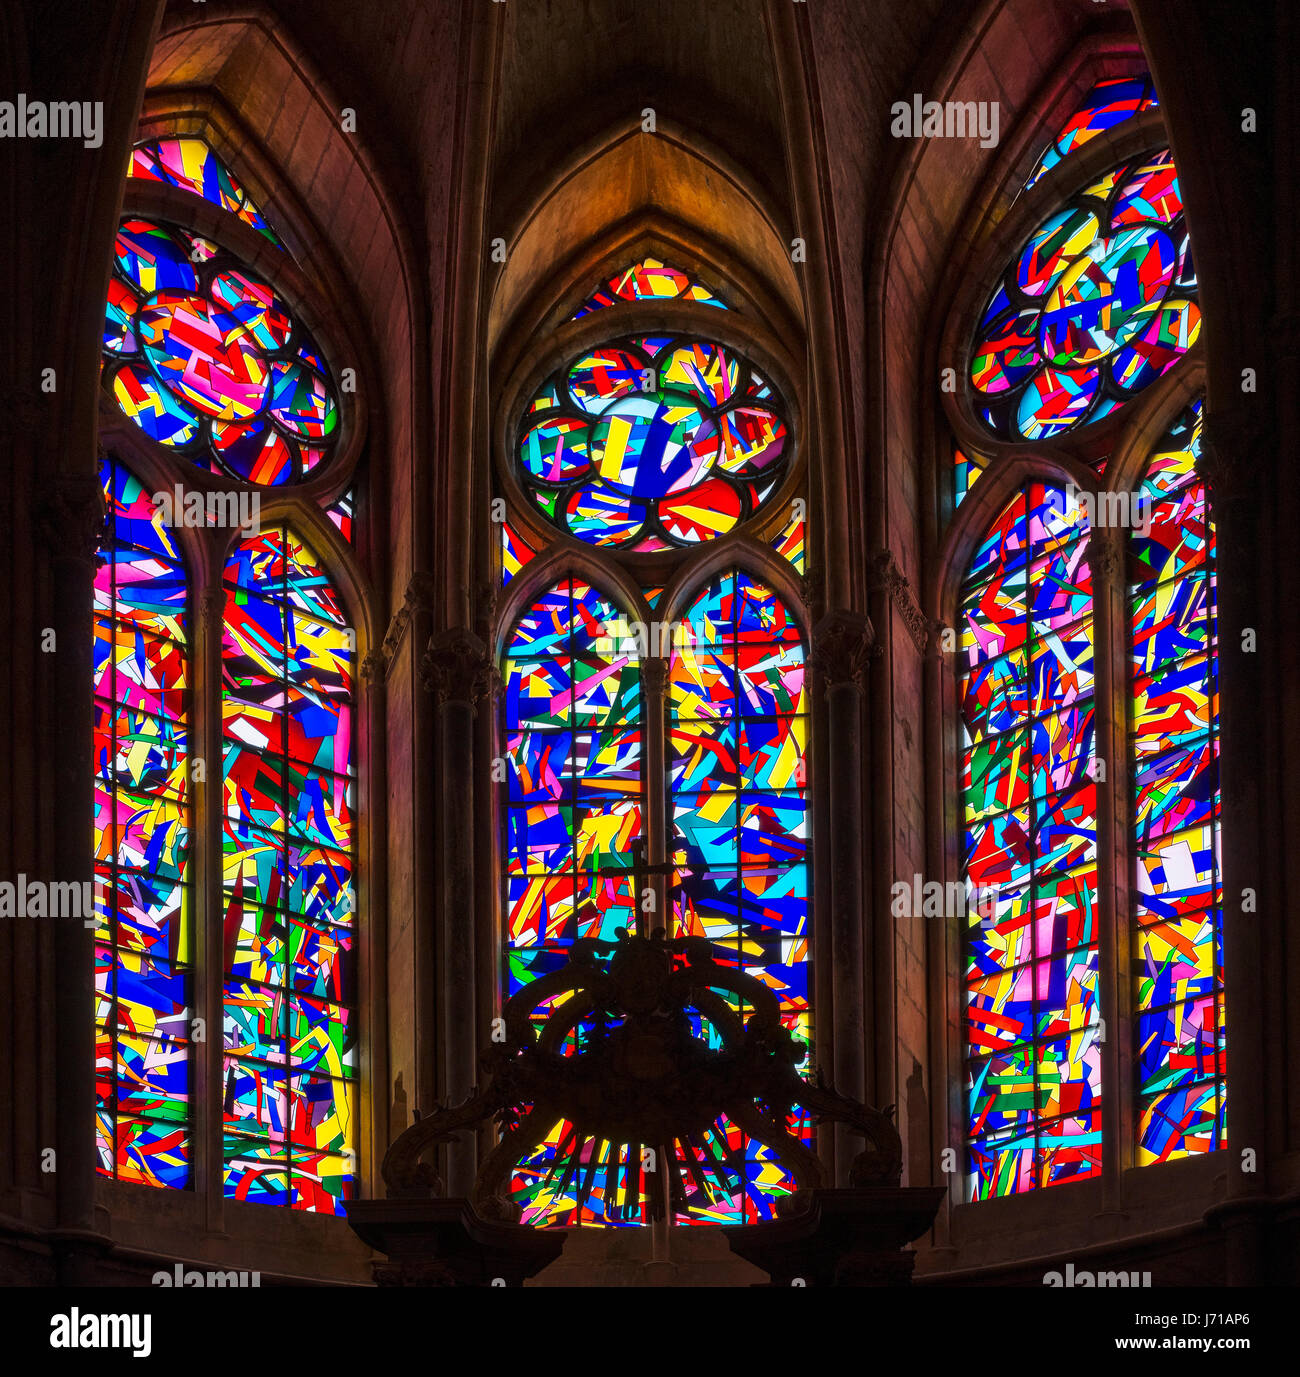 Modern stained glass windows by Imi Knoebel in the Cathedral of Notre Dame de Reims, Reims, France Stock Photo